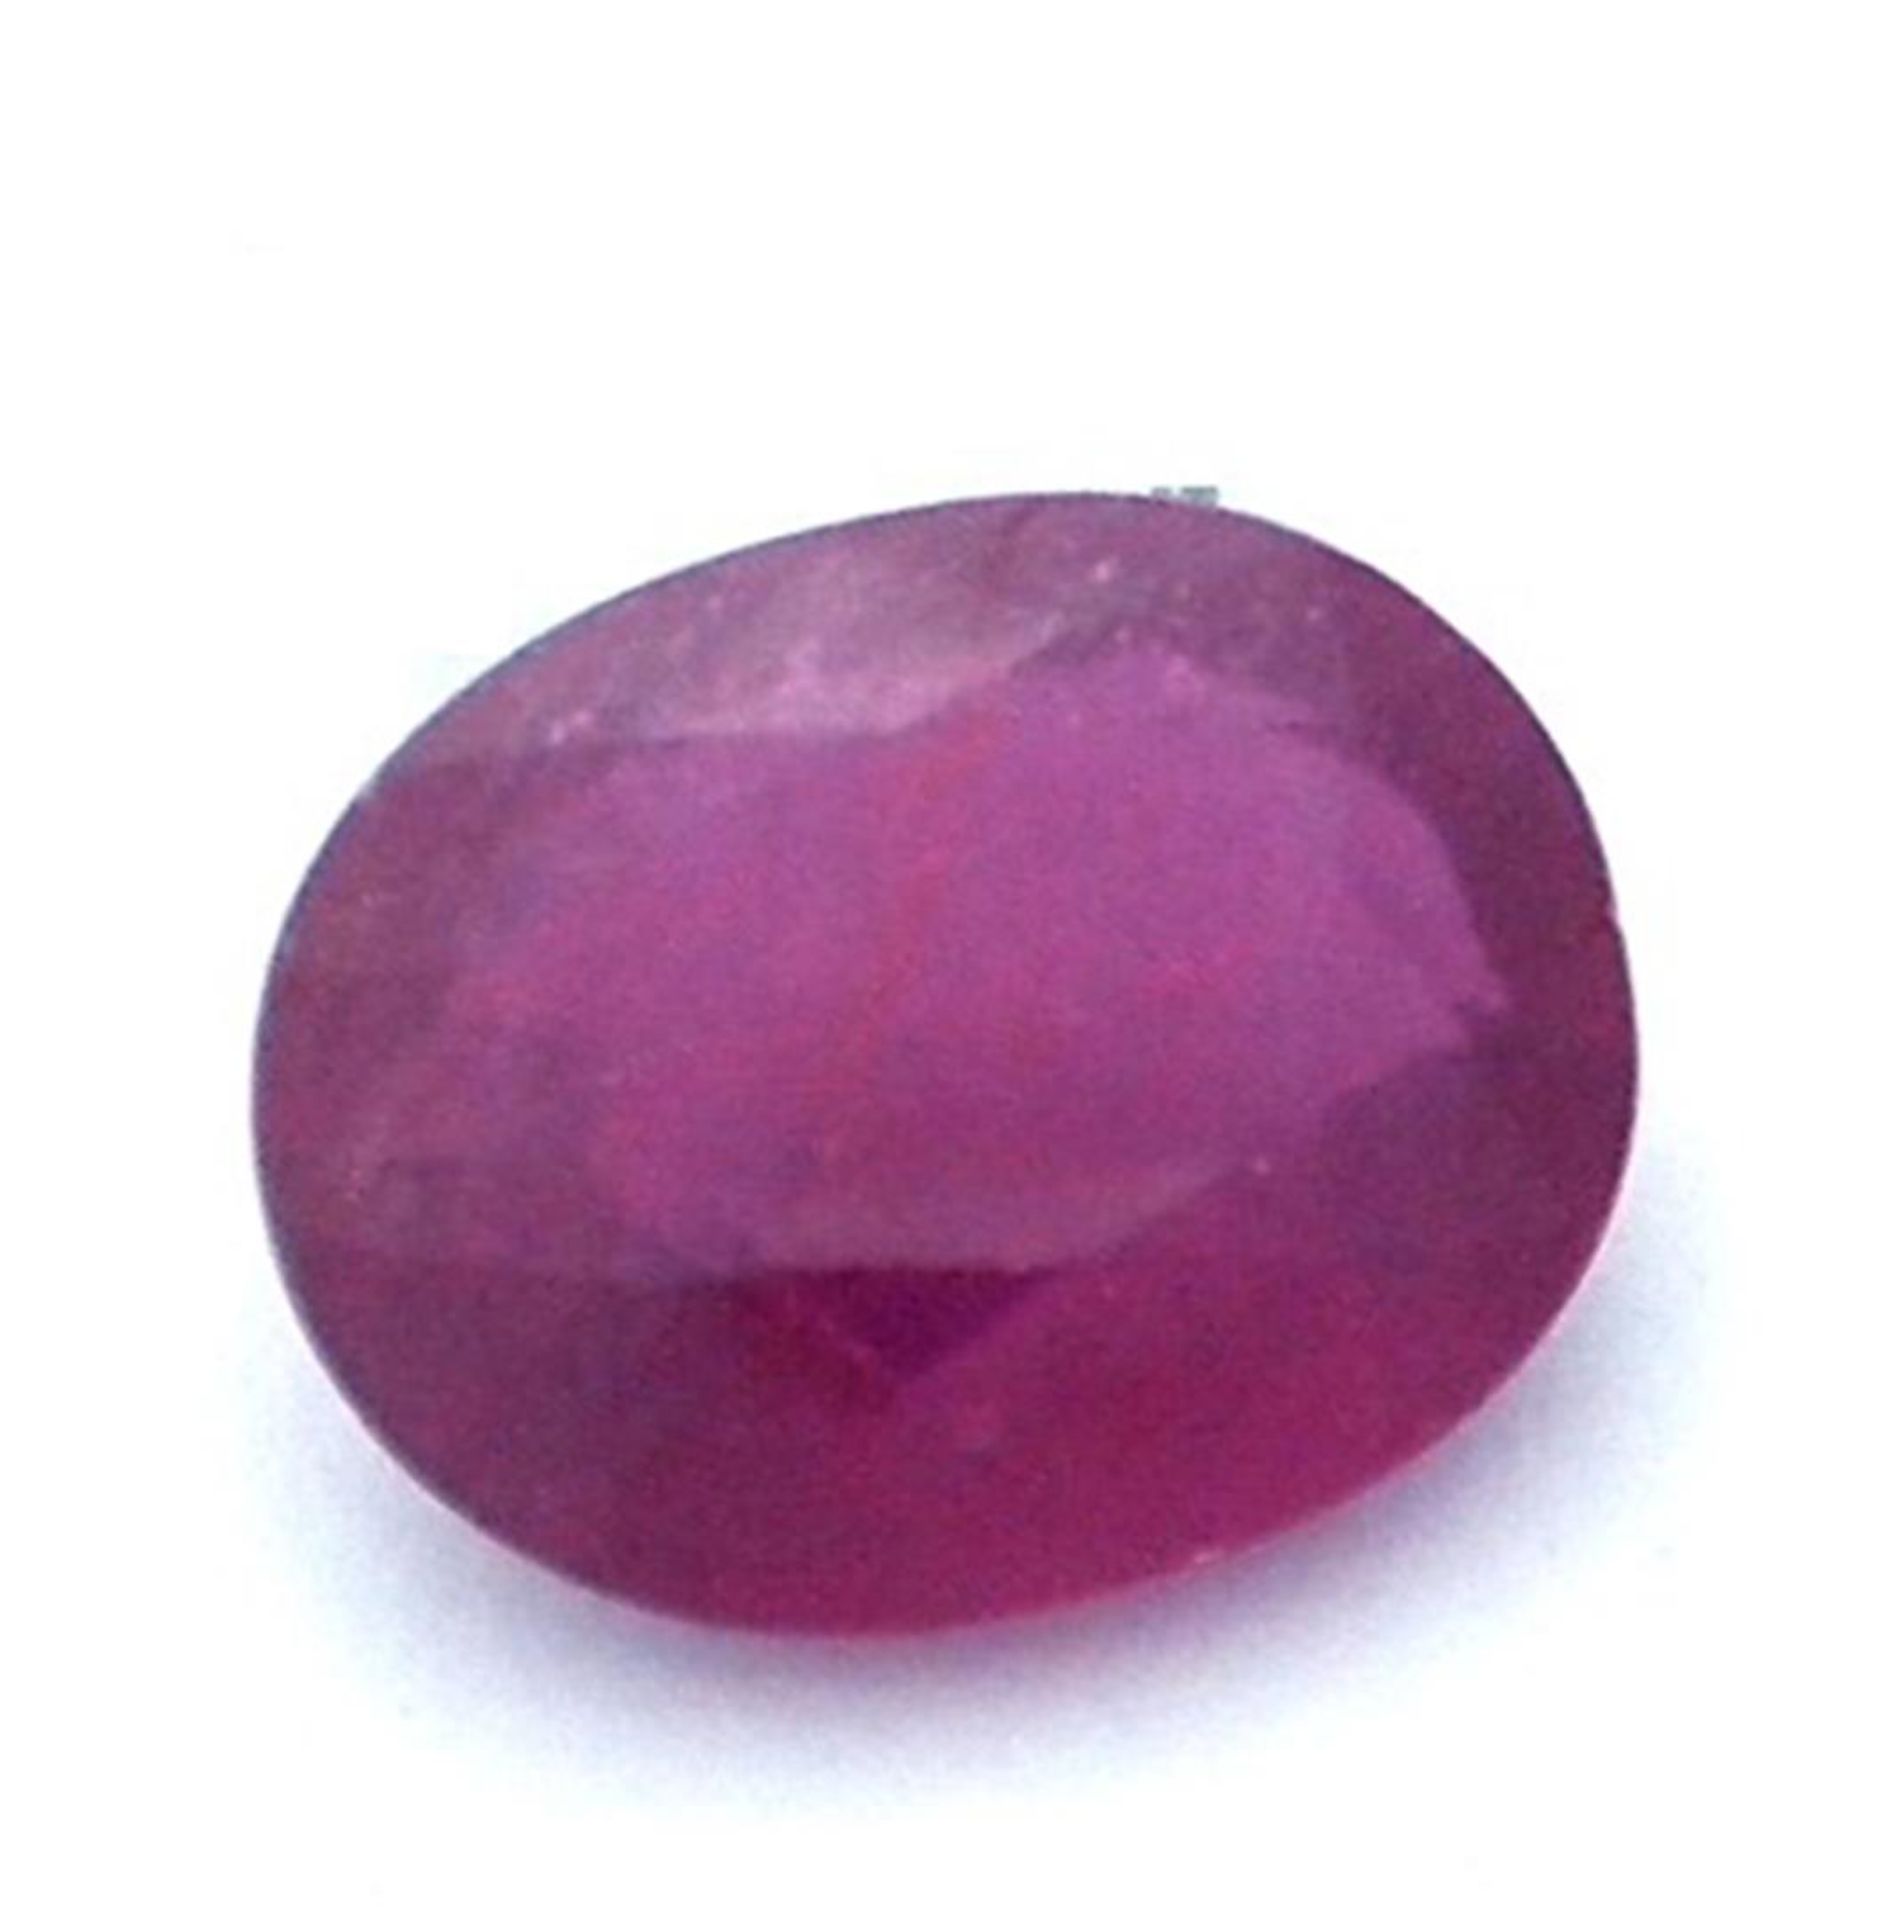 12.48 ctw Oval Ruby Parcel - Image 2 of 4